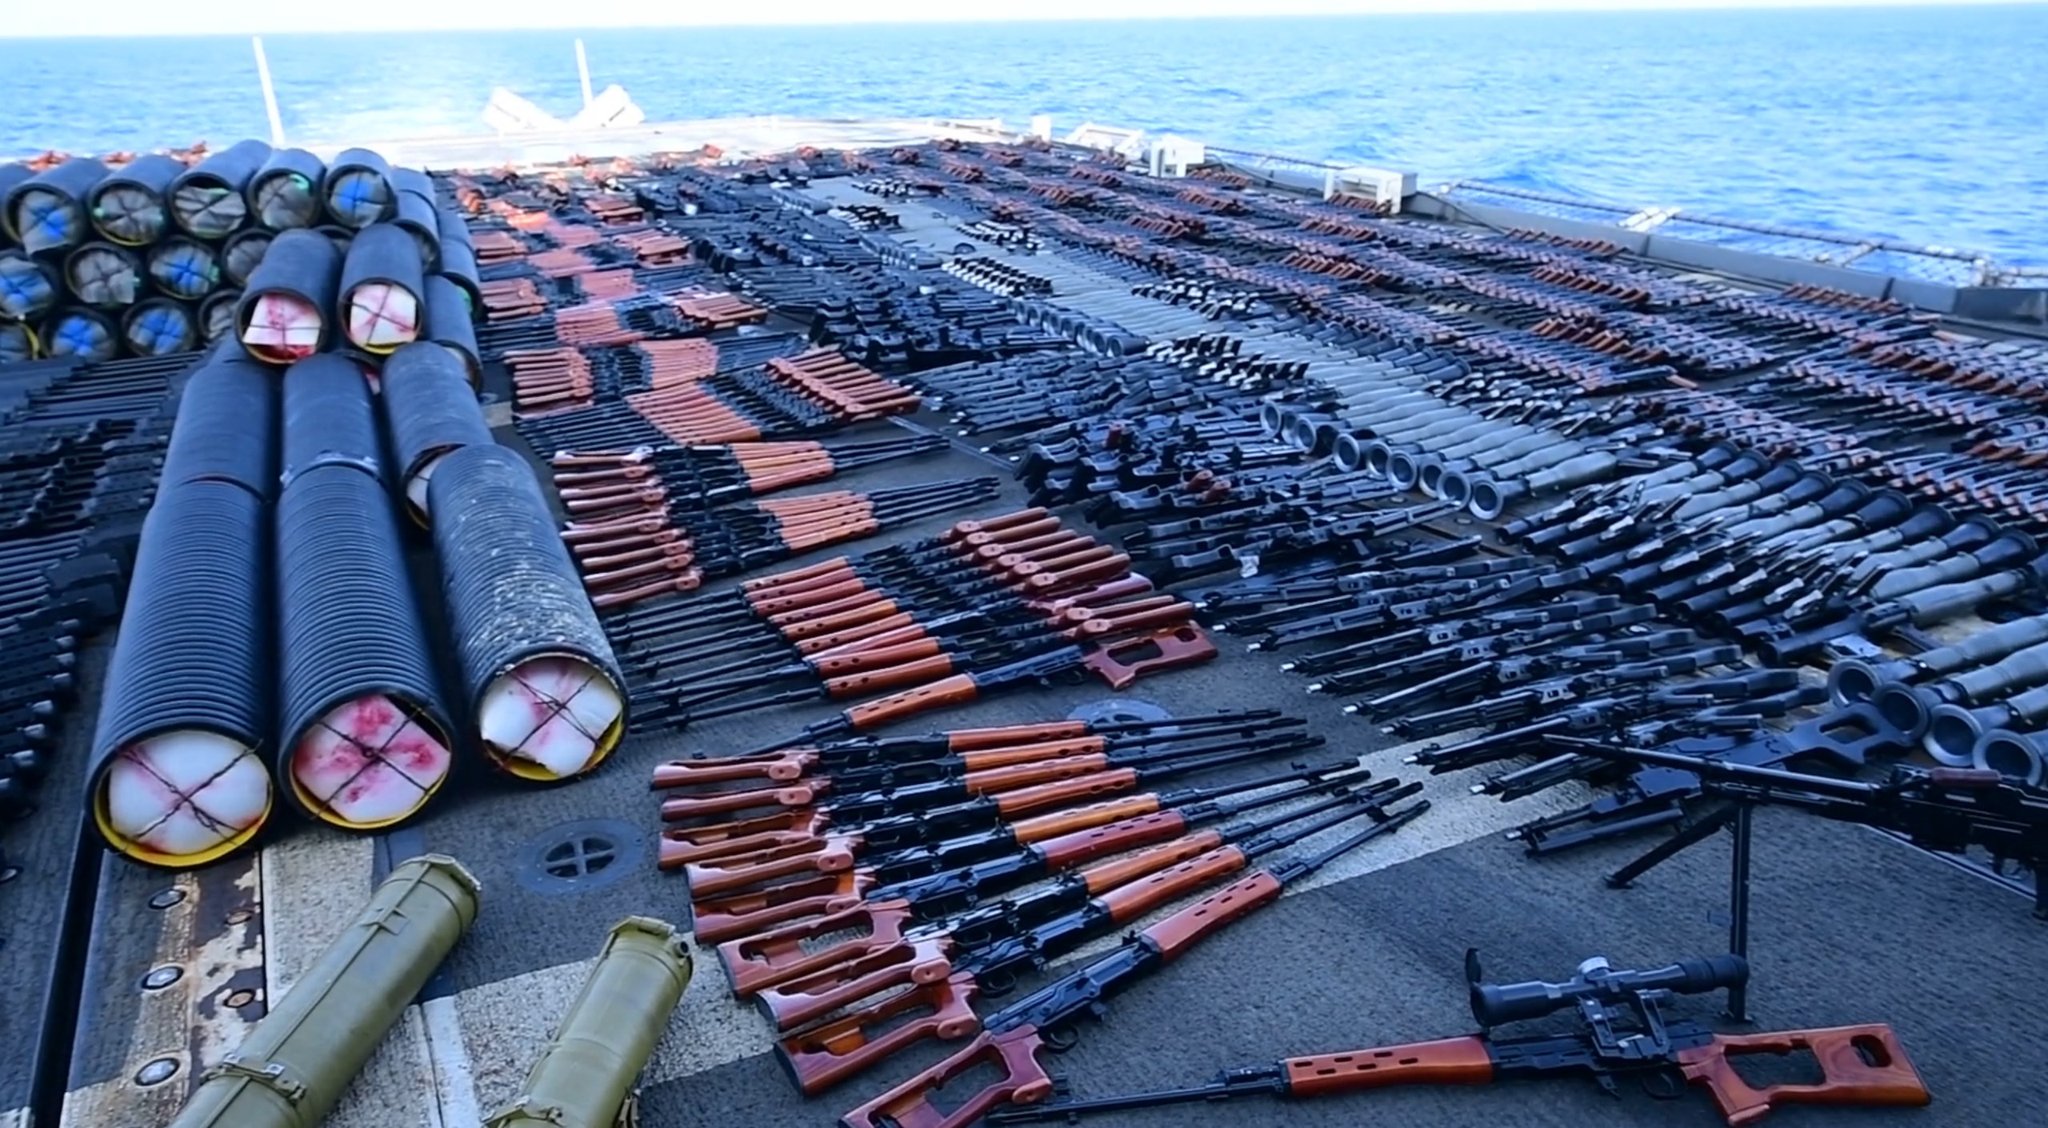 The Crisis of Weapons Smuggling to Yemen Continues